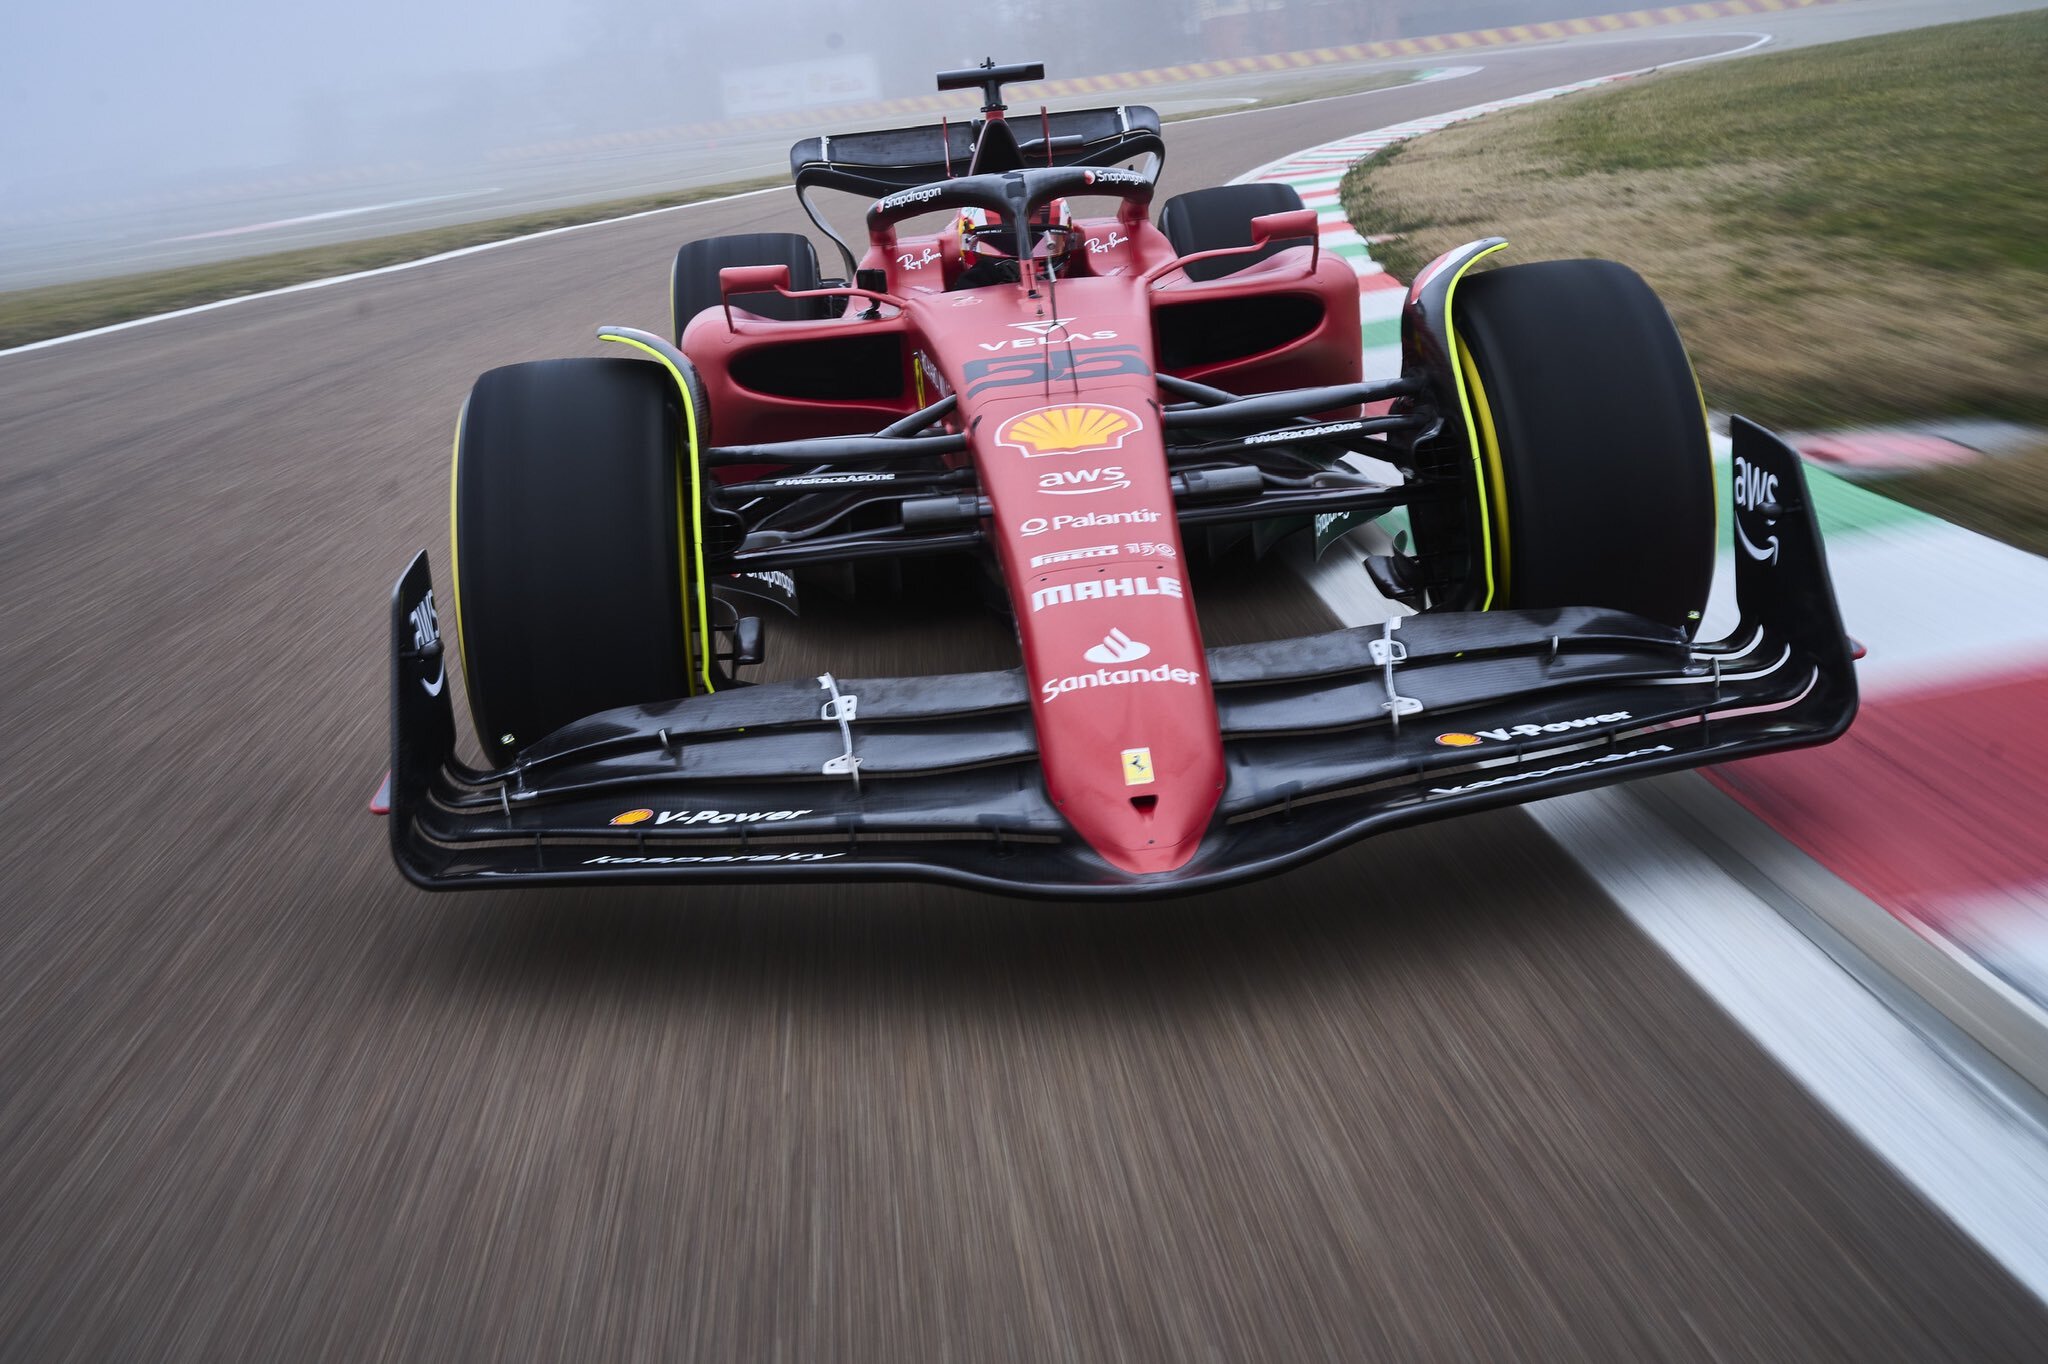 In photo: What the 2022 F1 cars look like on track